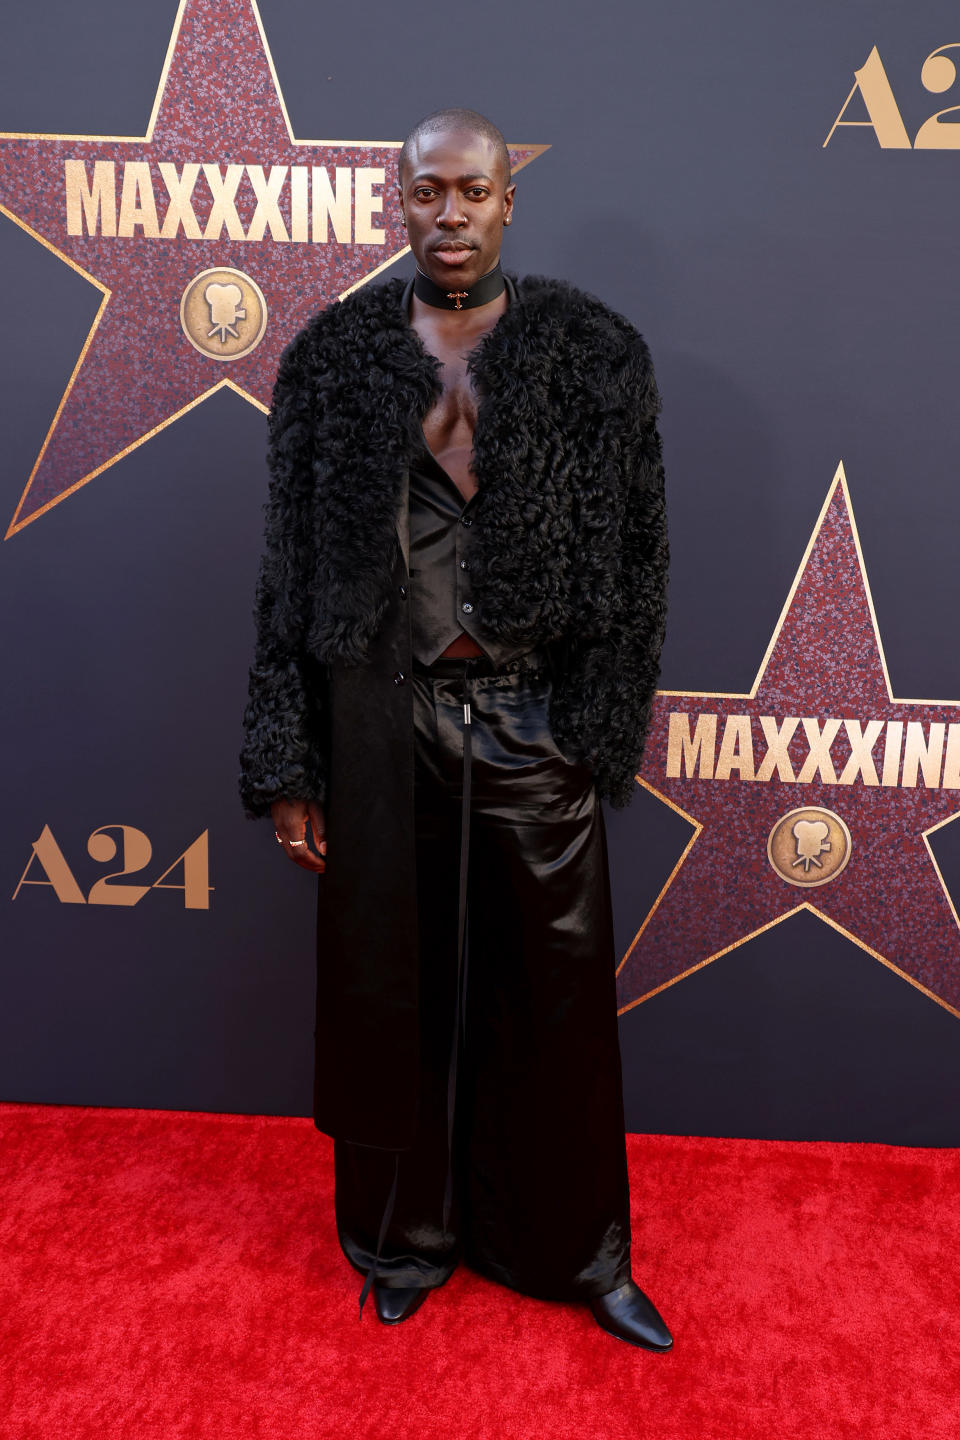 Moses Sumney is wearing a black textured coat, leather pants, and a choker necklace